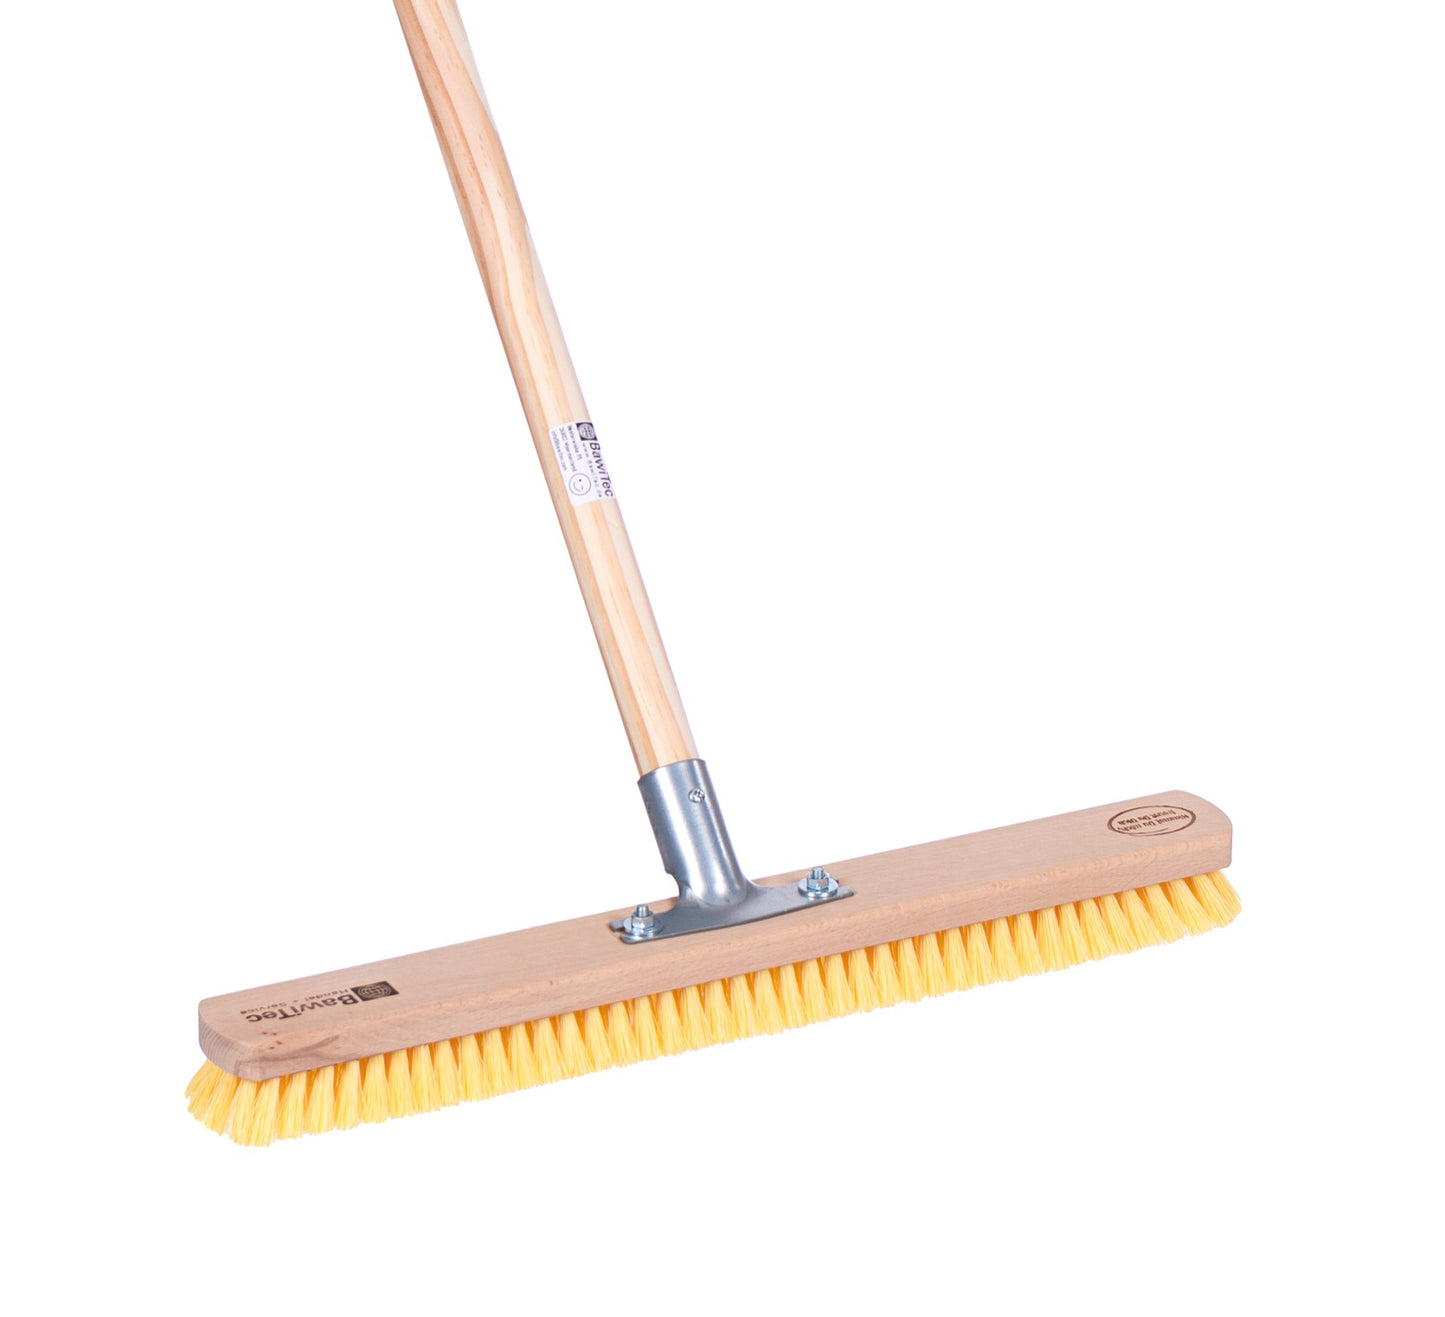 XXL wiper scrubber 50cm wide with sturdy wooden handle 28mm 140cm 160cm long 